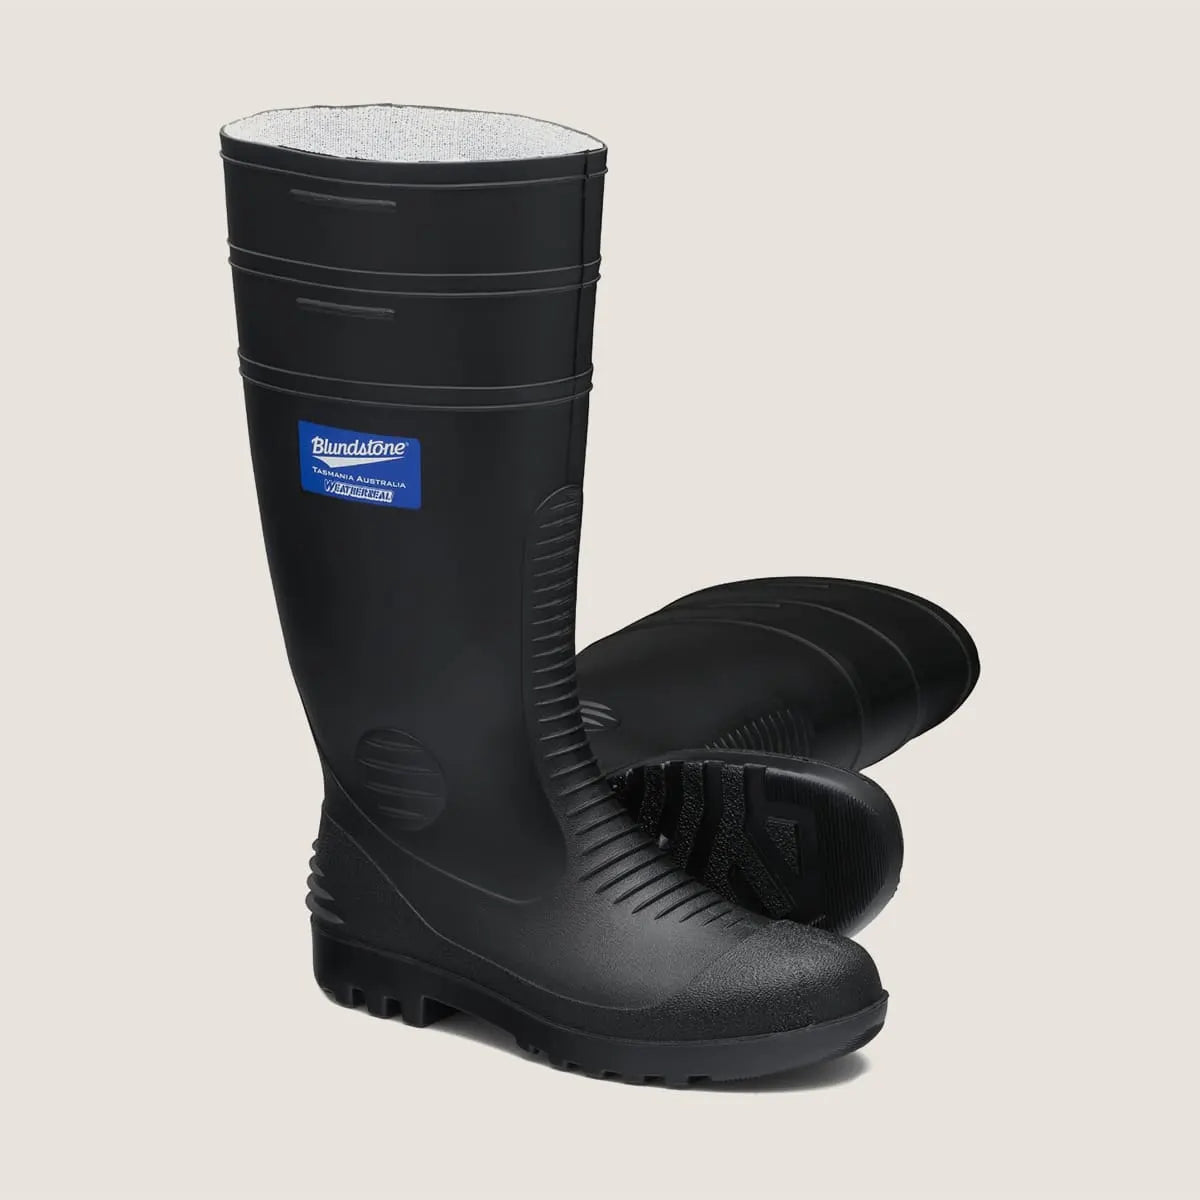 Blundstone 001 Non Safety Gumboots-Black